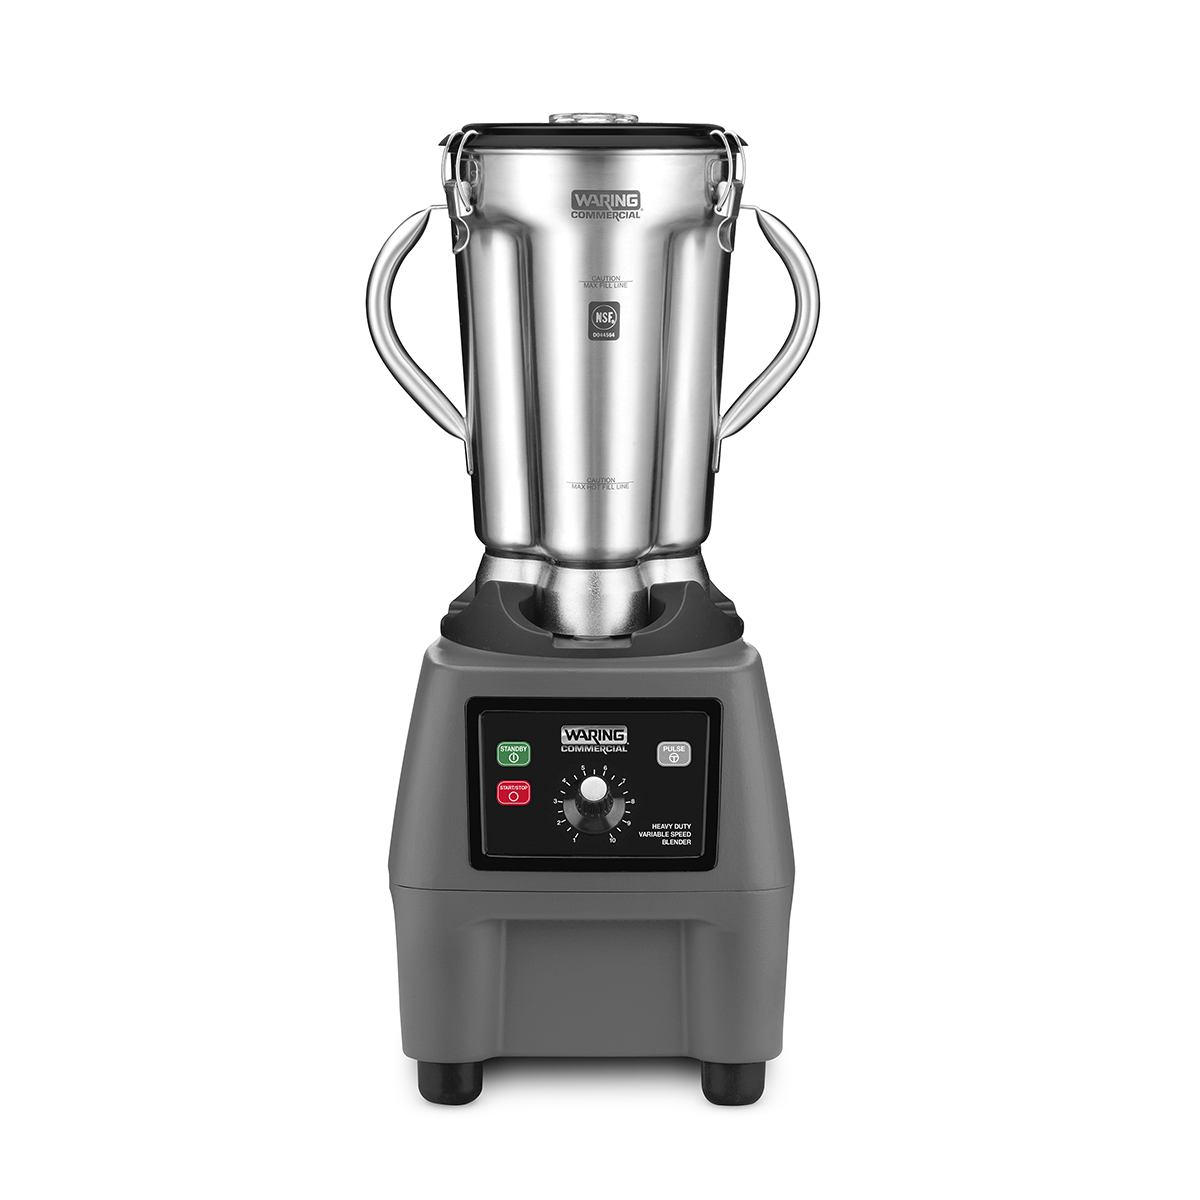 Waring One-Gallon Variable-Speed Food Blender